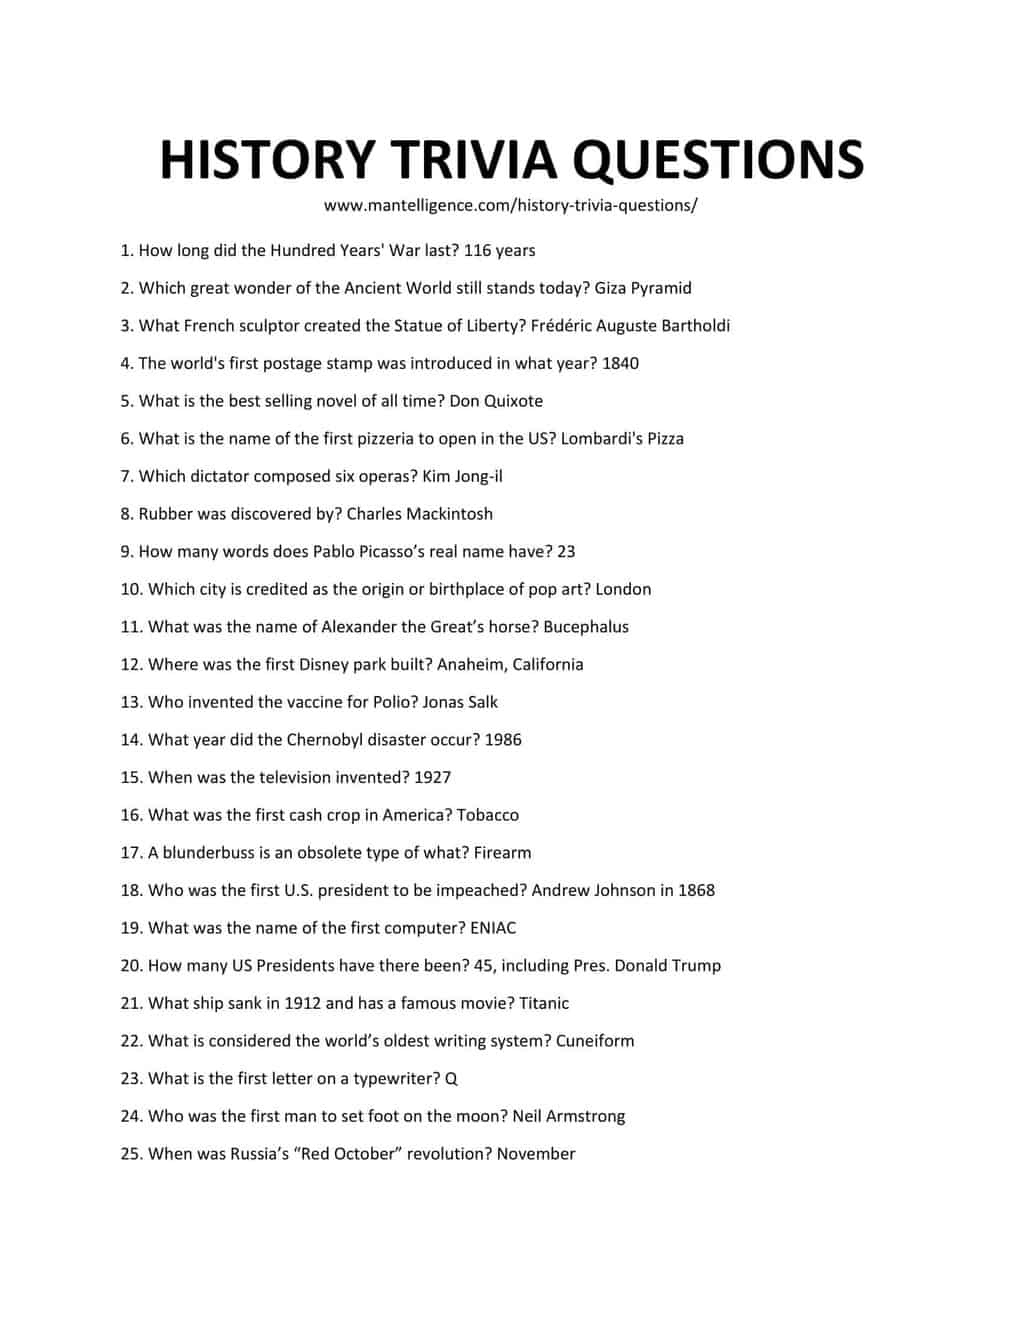 Women In History Trivia Questions And Answers